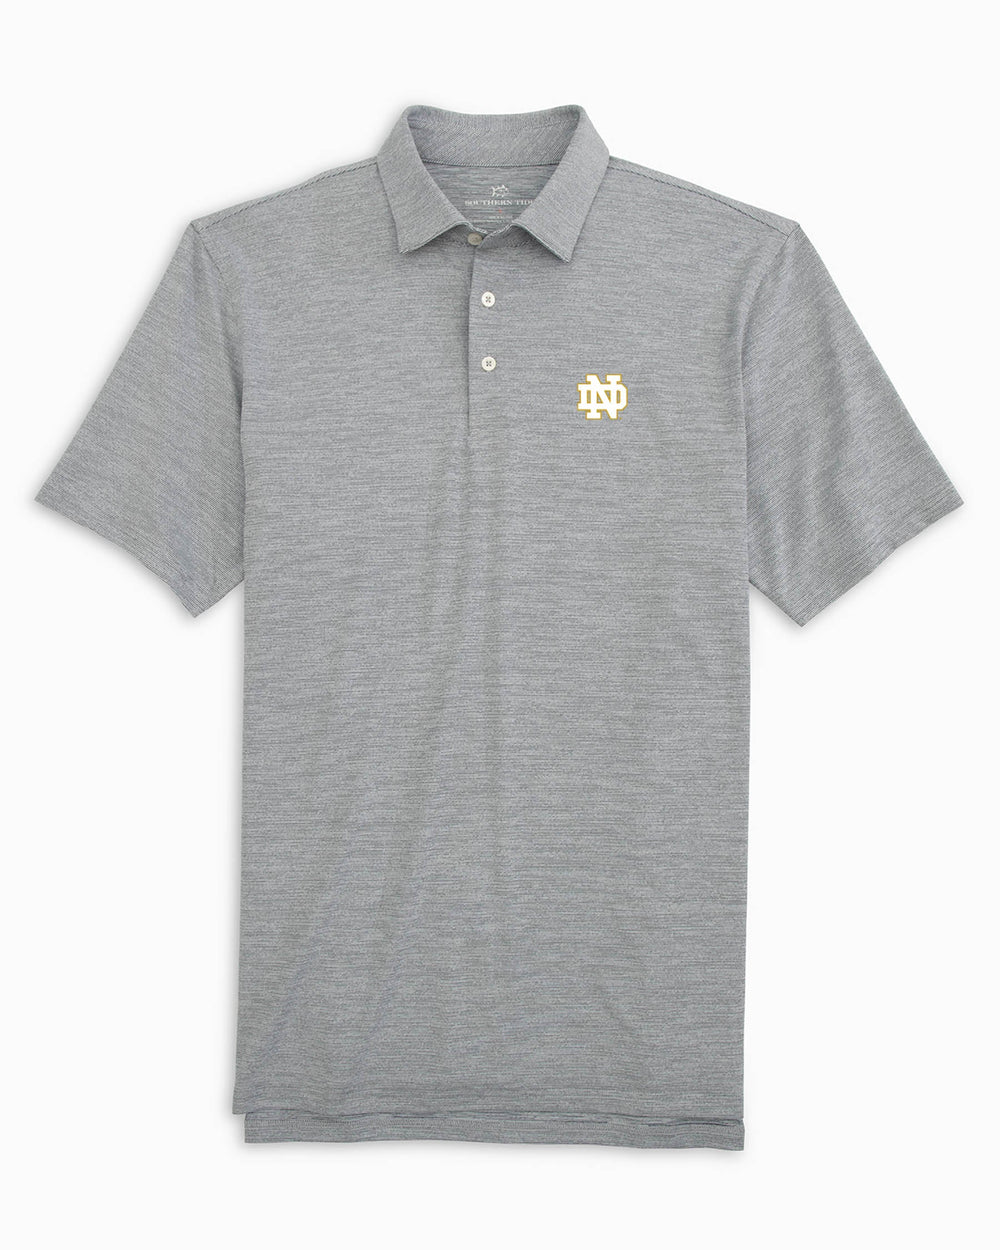 The front of the Notre Dame Fighting Irish Driver Spacedye Polo Shirt by Southern Tide - Navy